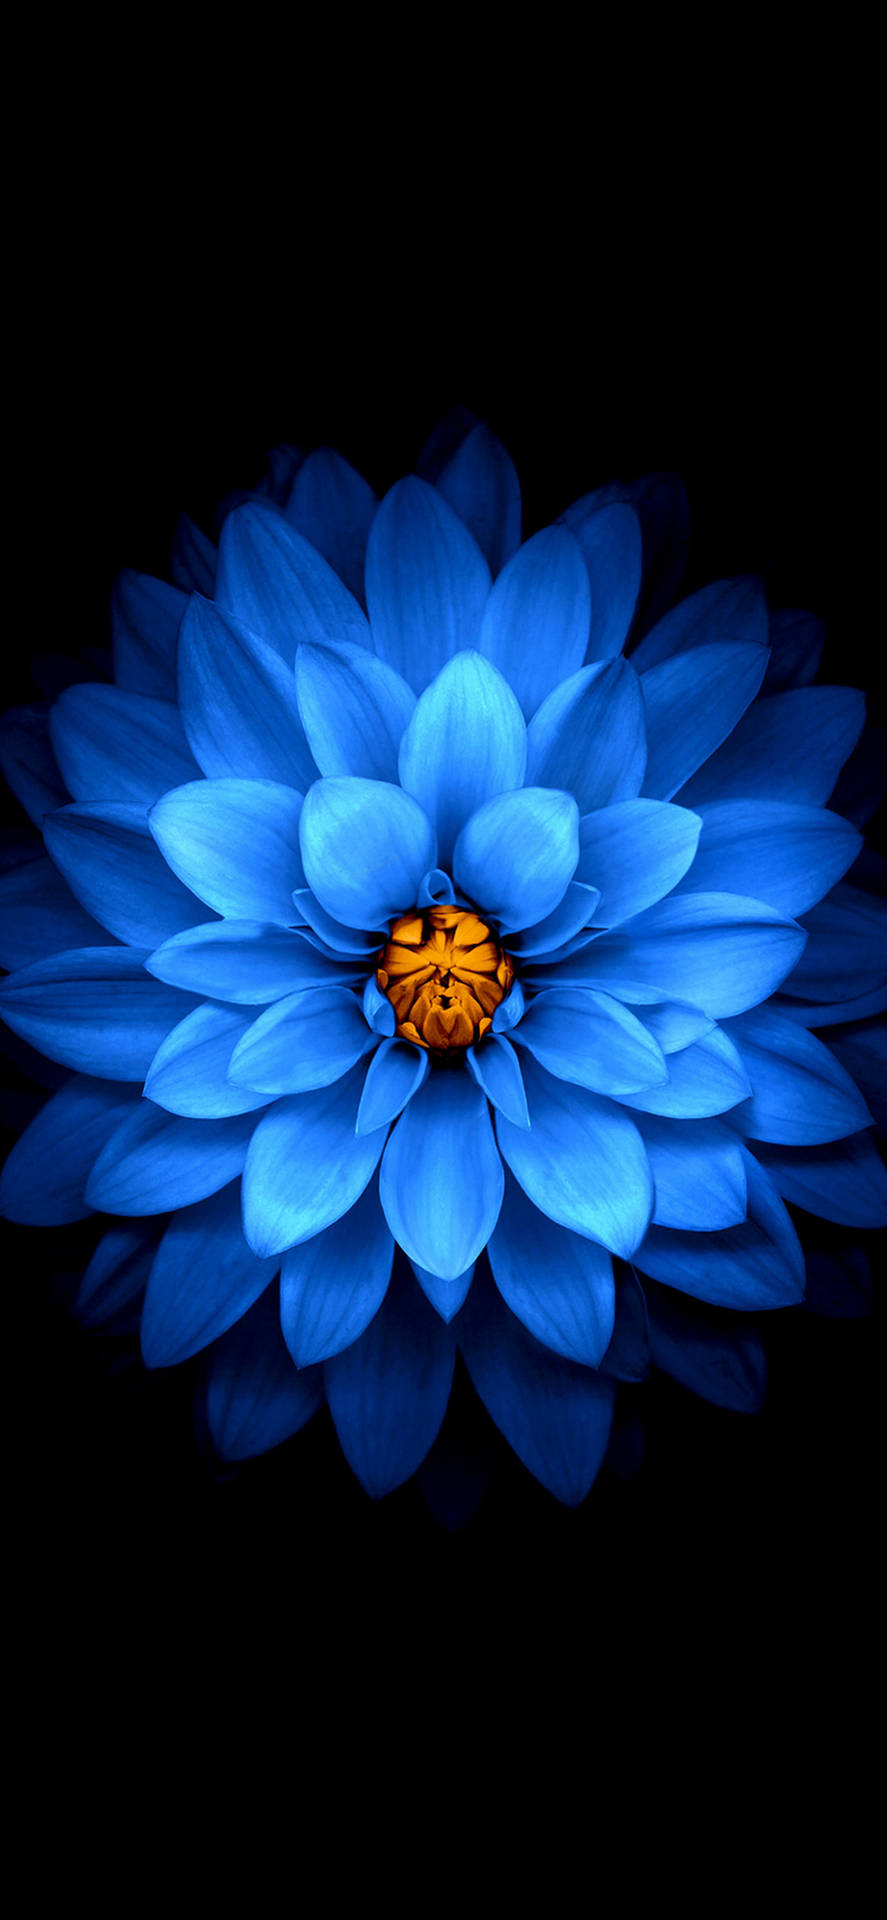 Iphone 11 Pro Max Blue Flower